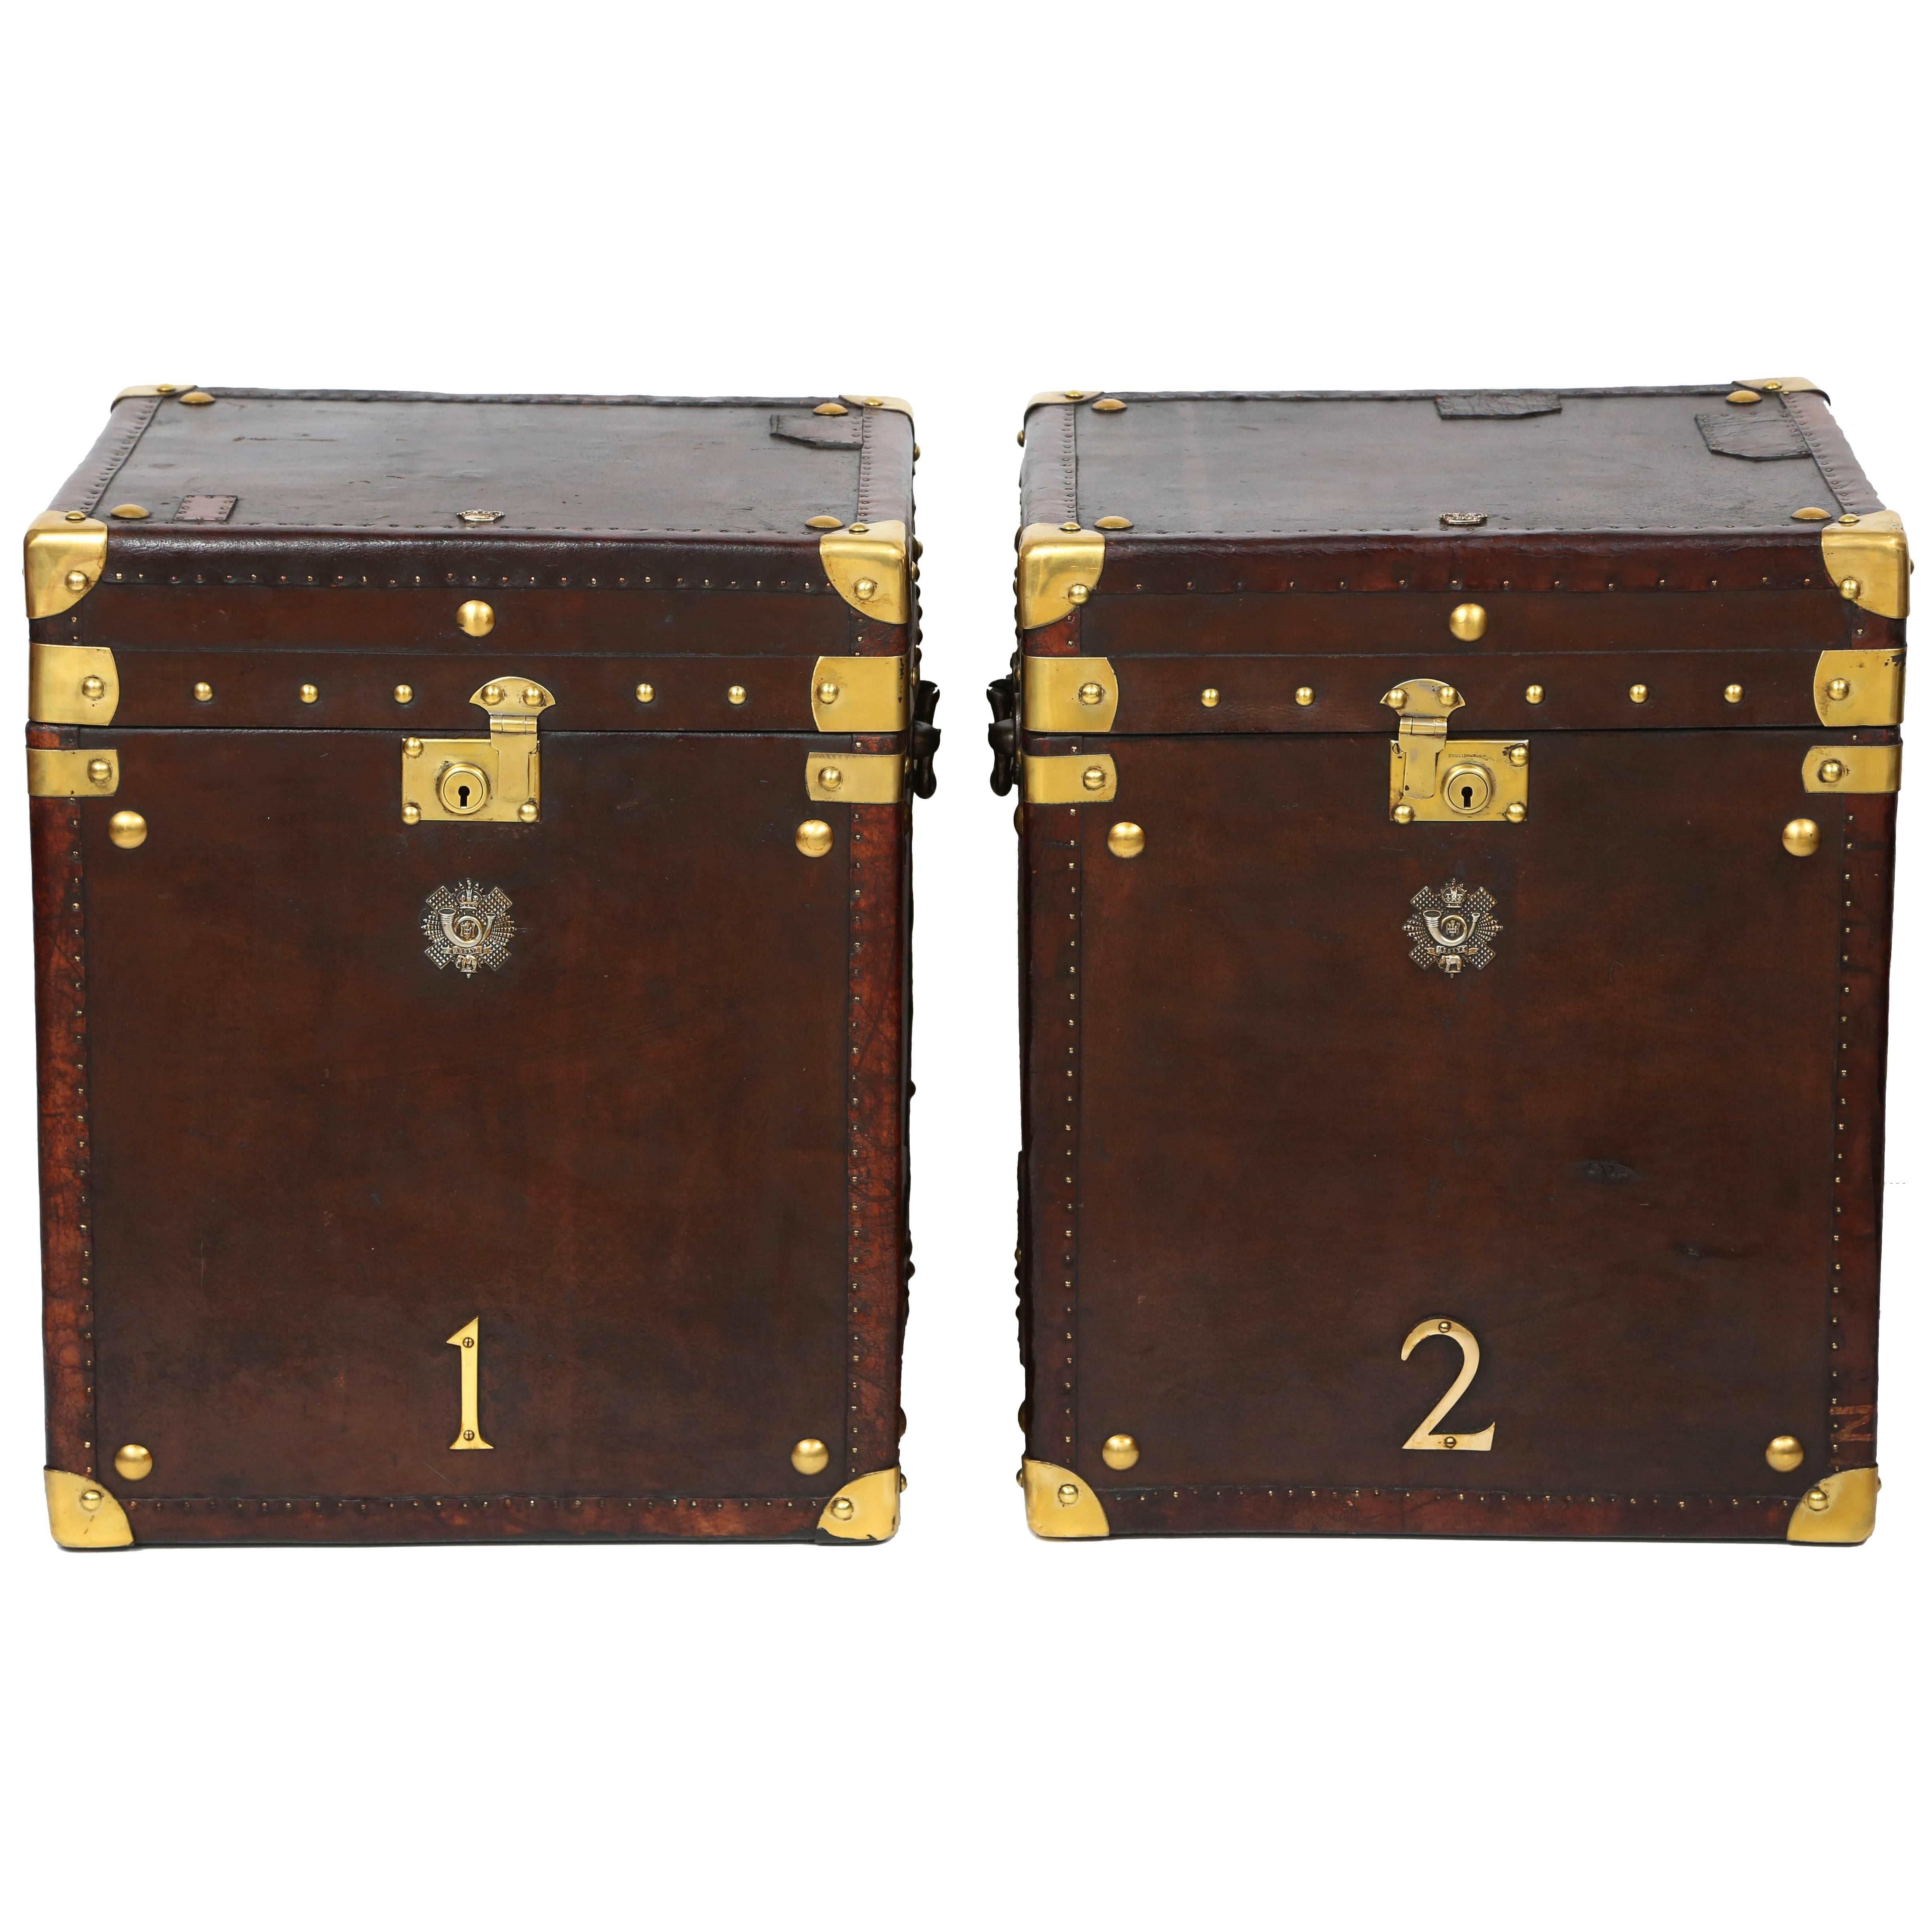 Pair of Vintage Leather Storage Trunks with Brass Trim